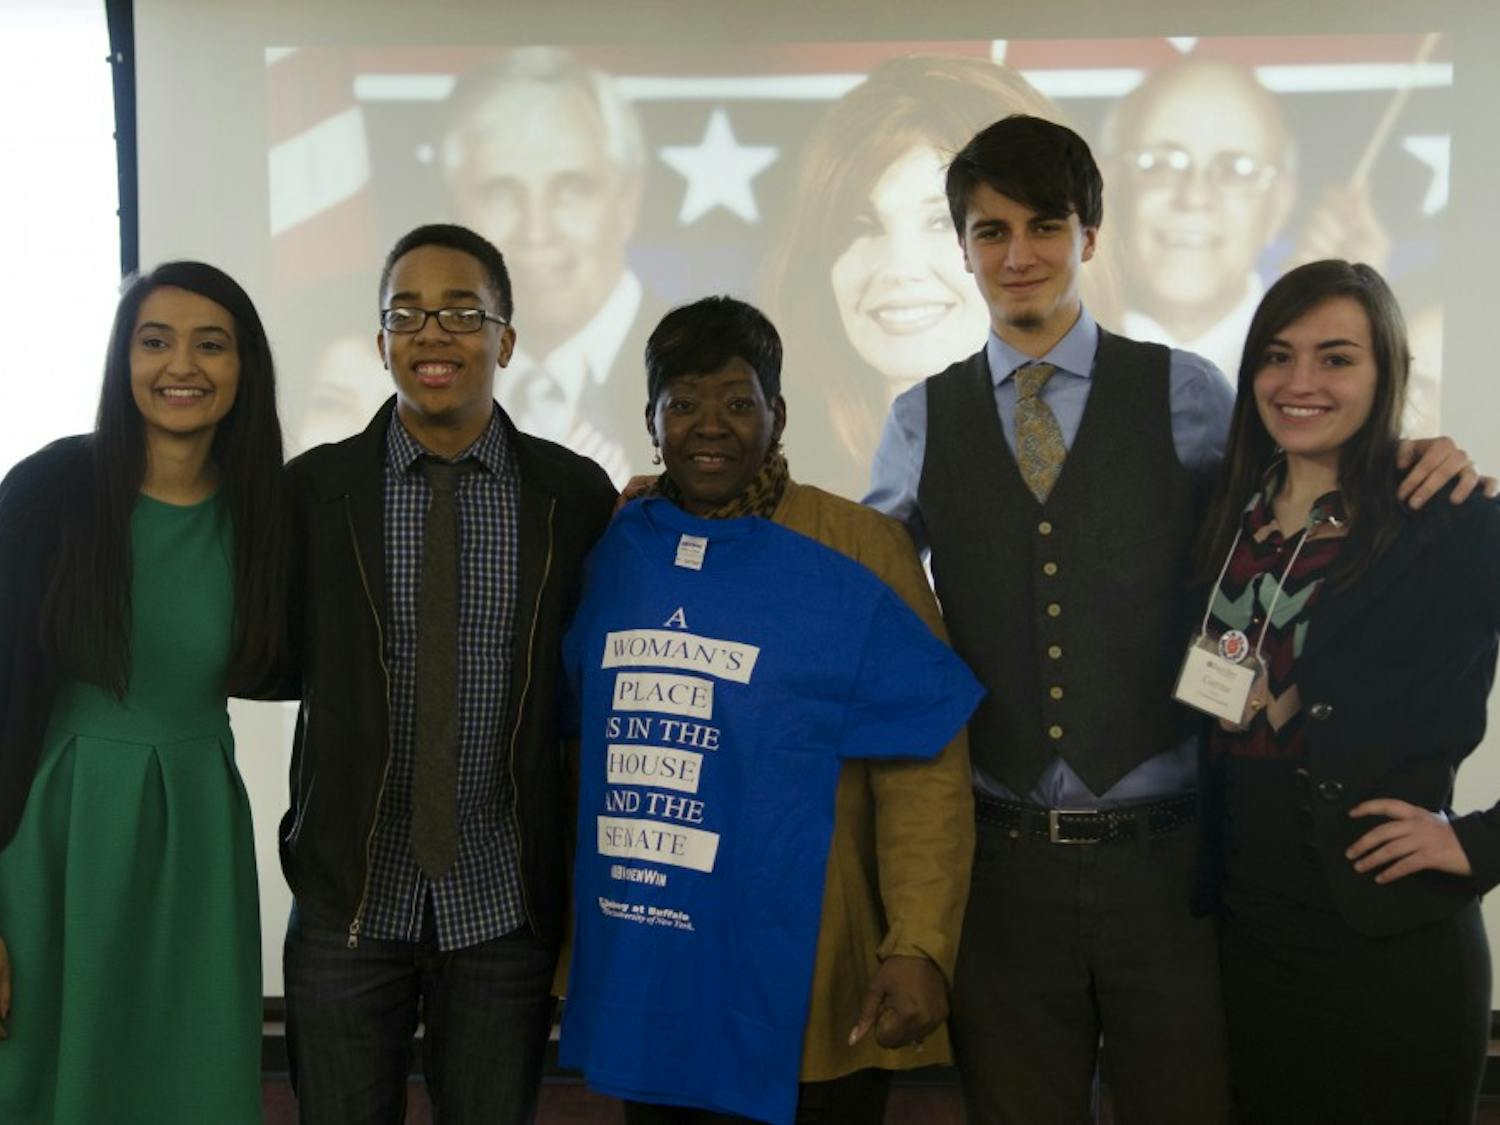 Minahil Khan, Daniel Carter, New York State Assemblywoman Crystal Peoples-Stokes, Shane Nolan and Corrine Cardinale at Elect Her on Saturday. Khan, Carter, Nolan and Cardinale planned the event, which featured keynote speaker Peoples-Stokes.